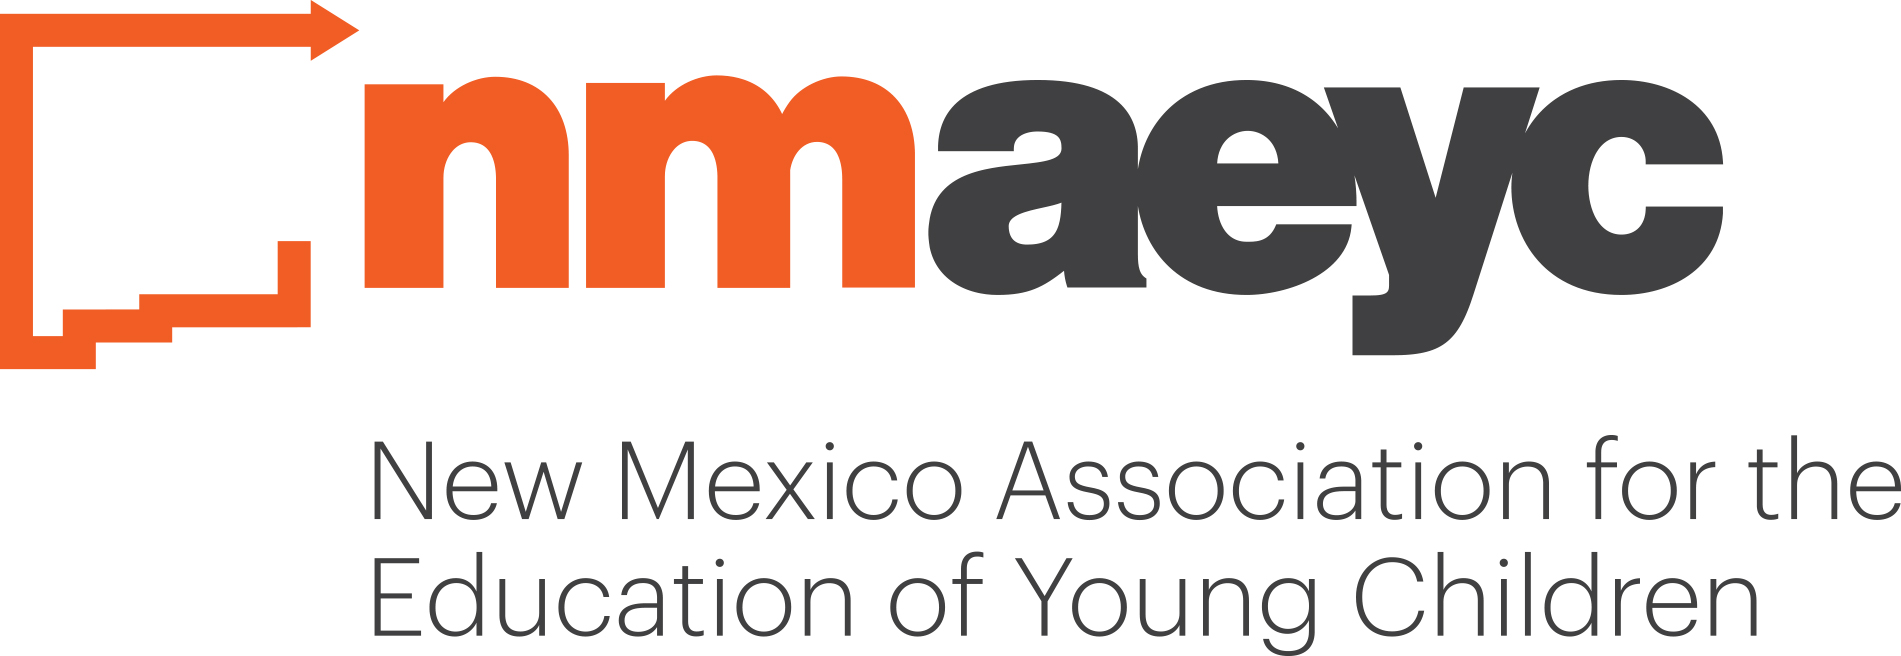 New Mexico Association for the Education of Young Children logo